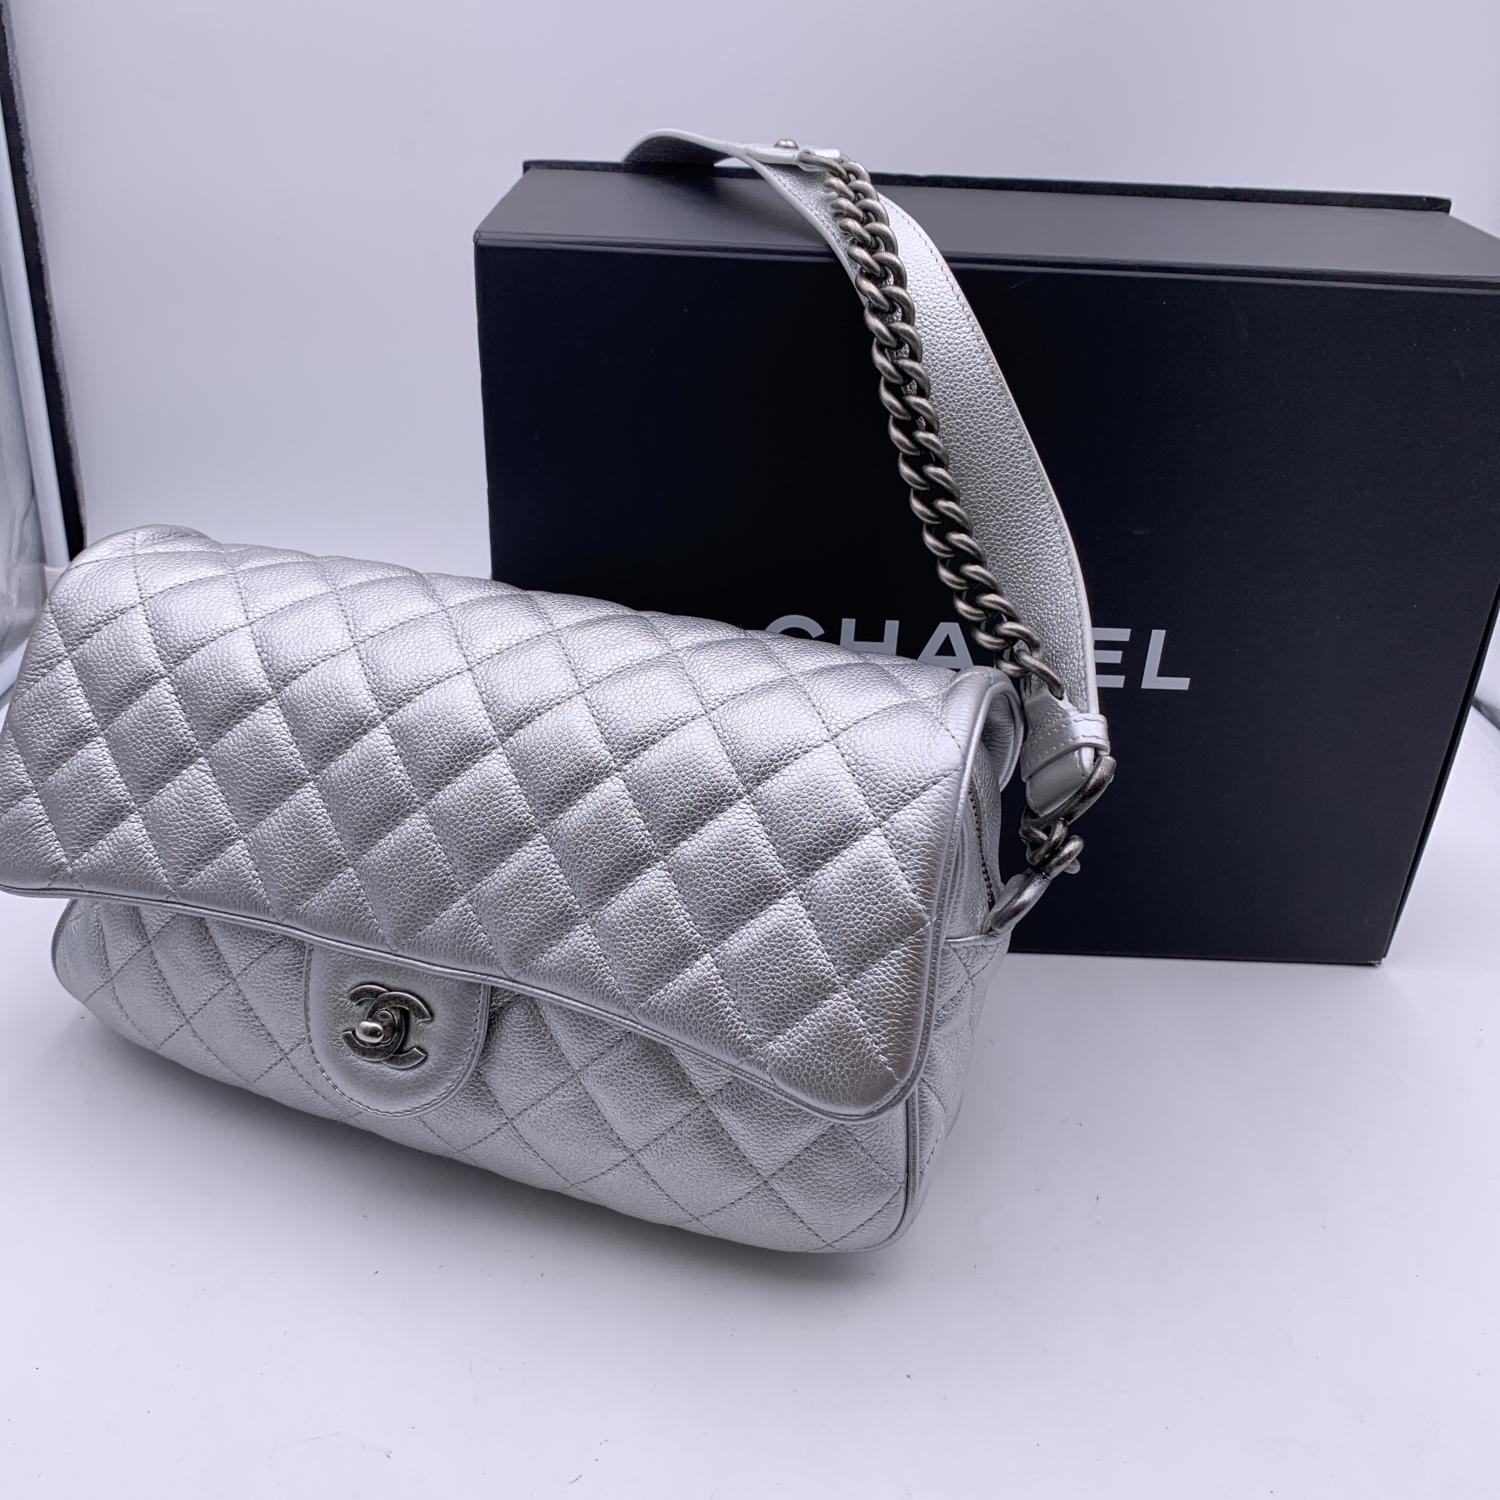 Chanel Airline 2016 Silver Metal Quilted Leather Easy Flap Shoulder Bag 12